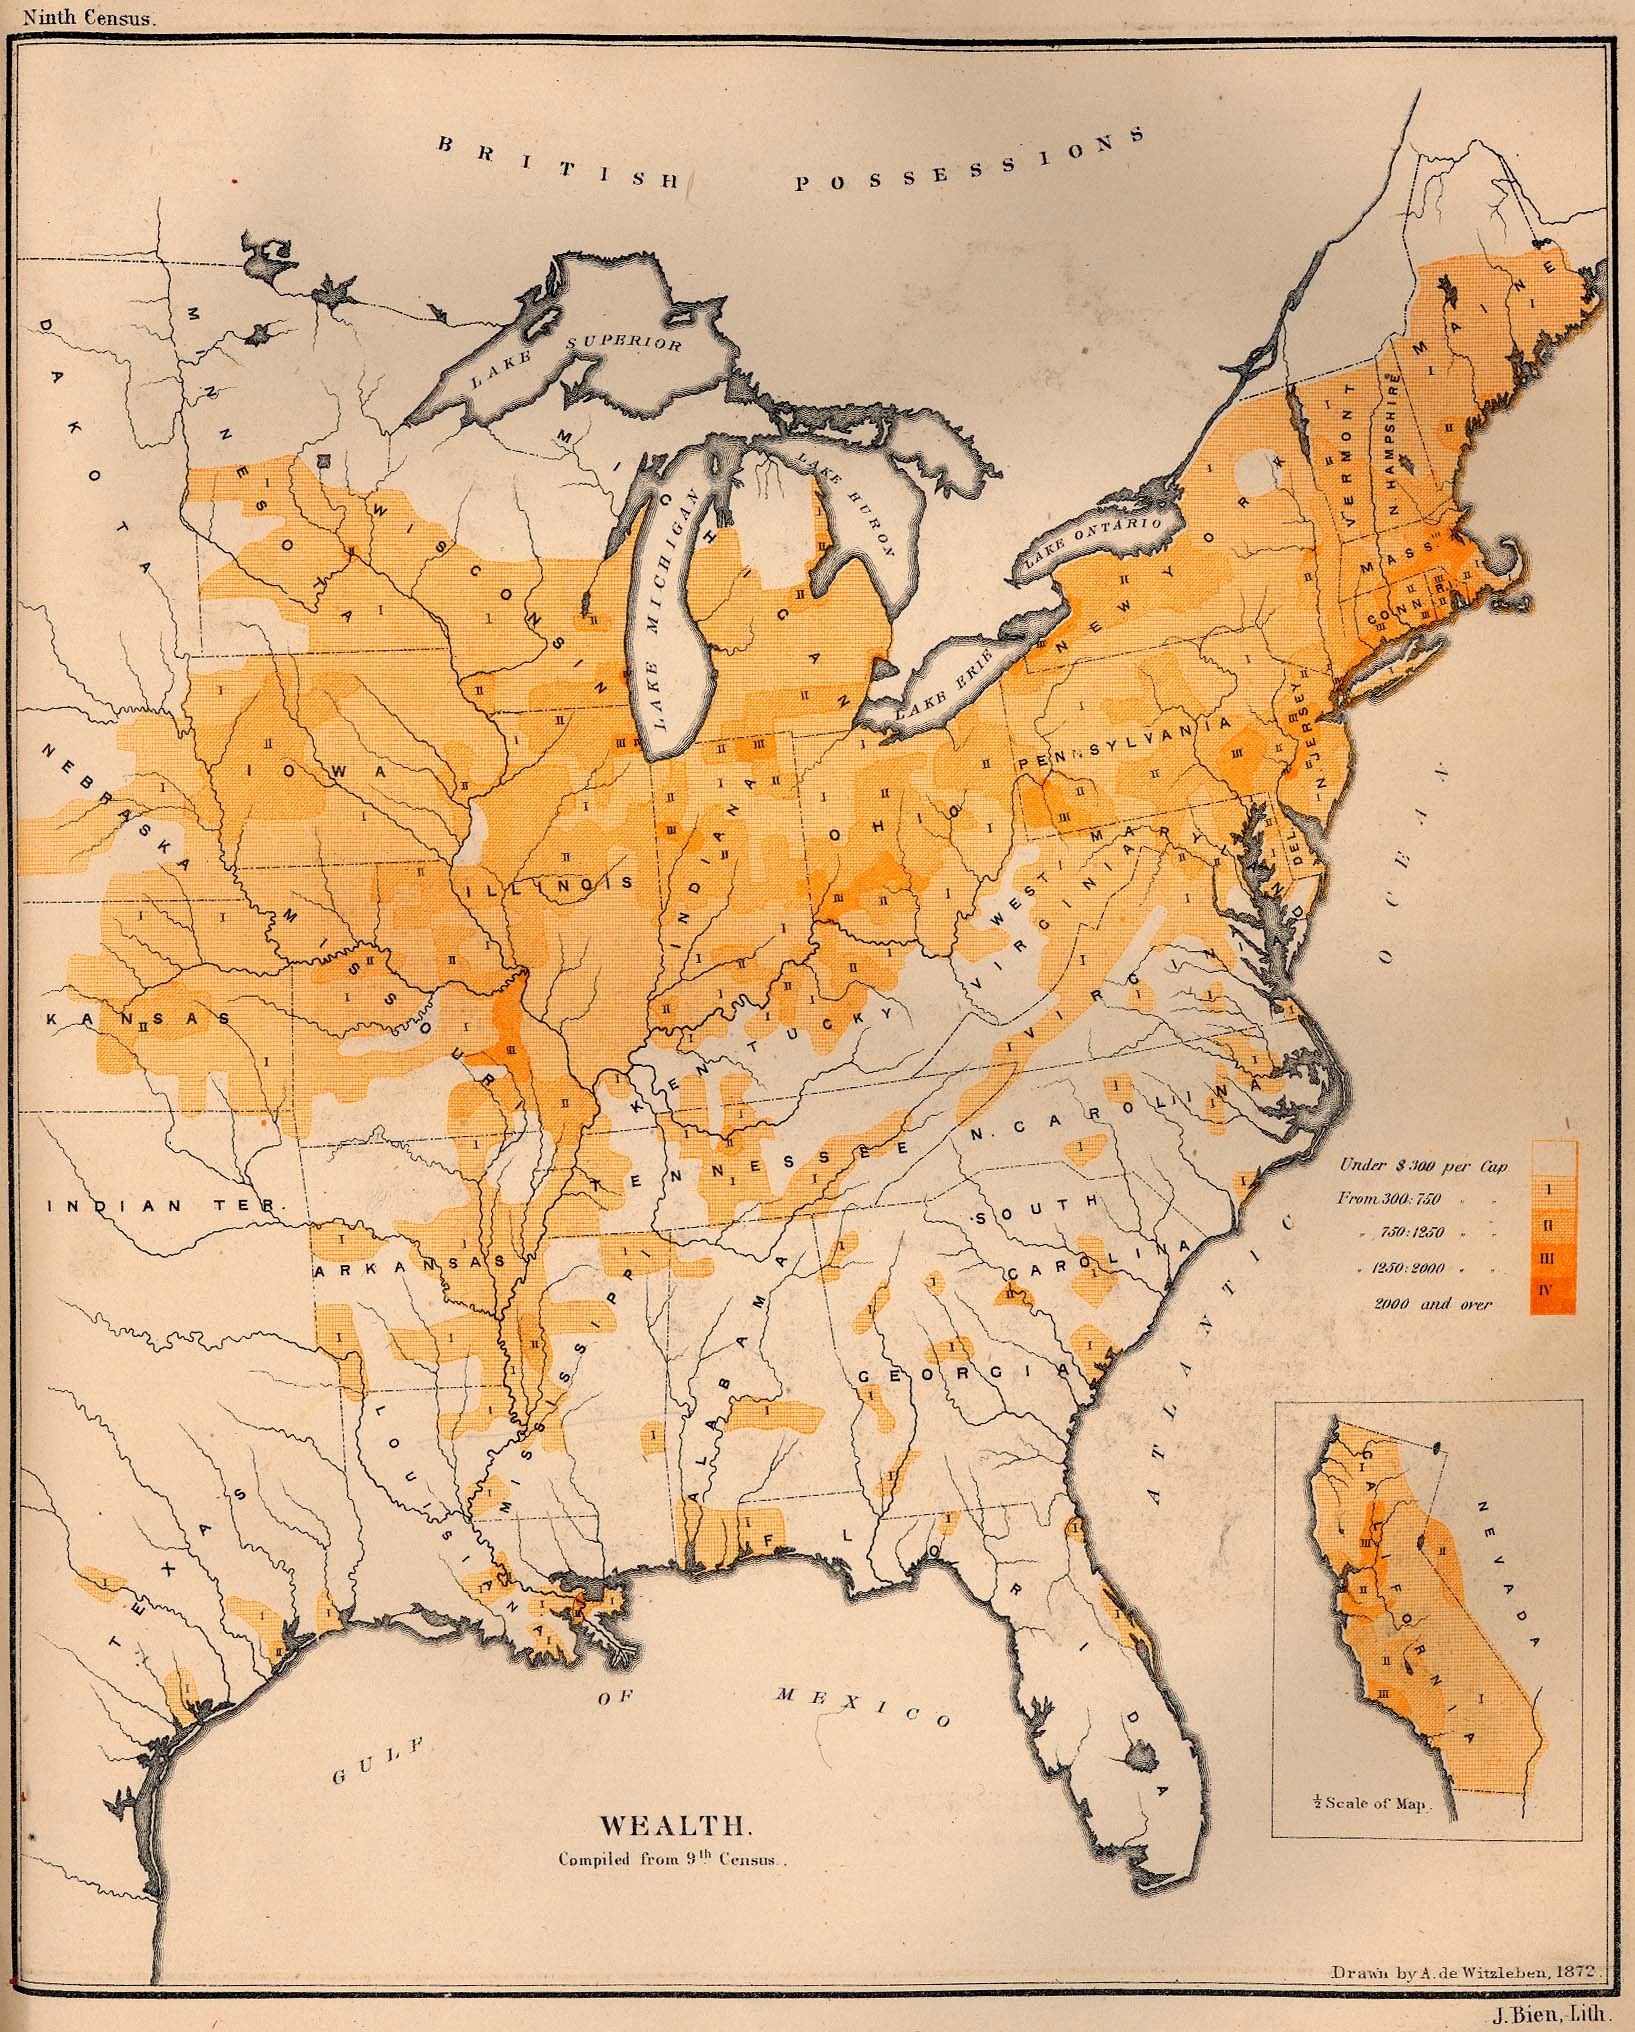 This 1872 map shows the distribution of per capita (per person) wealth in the United States.